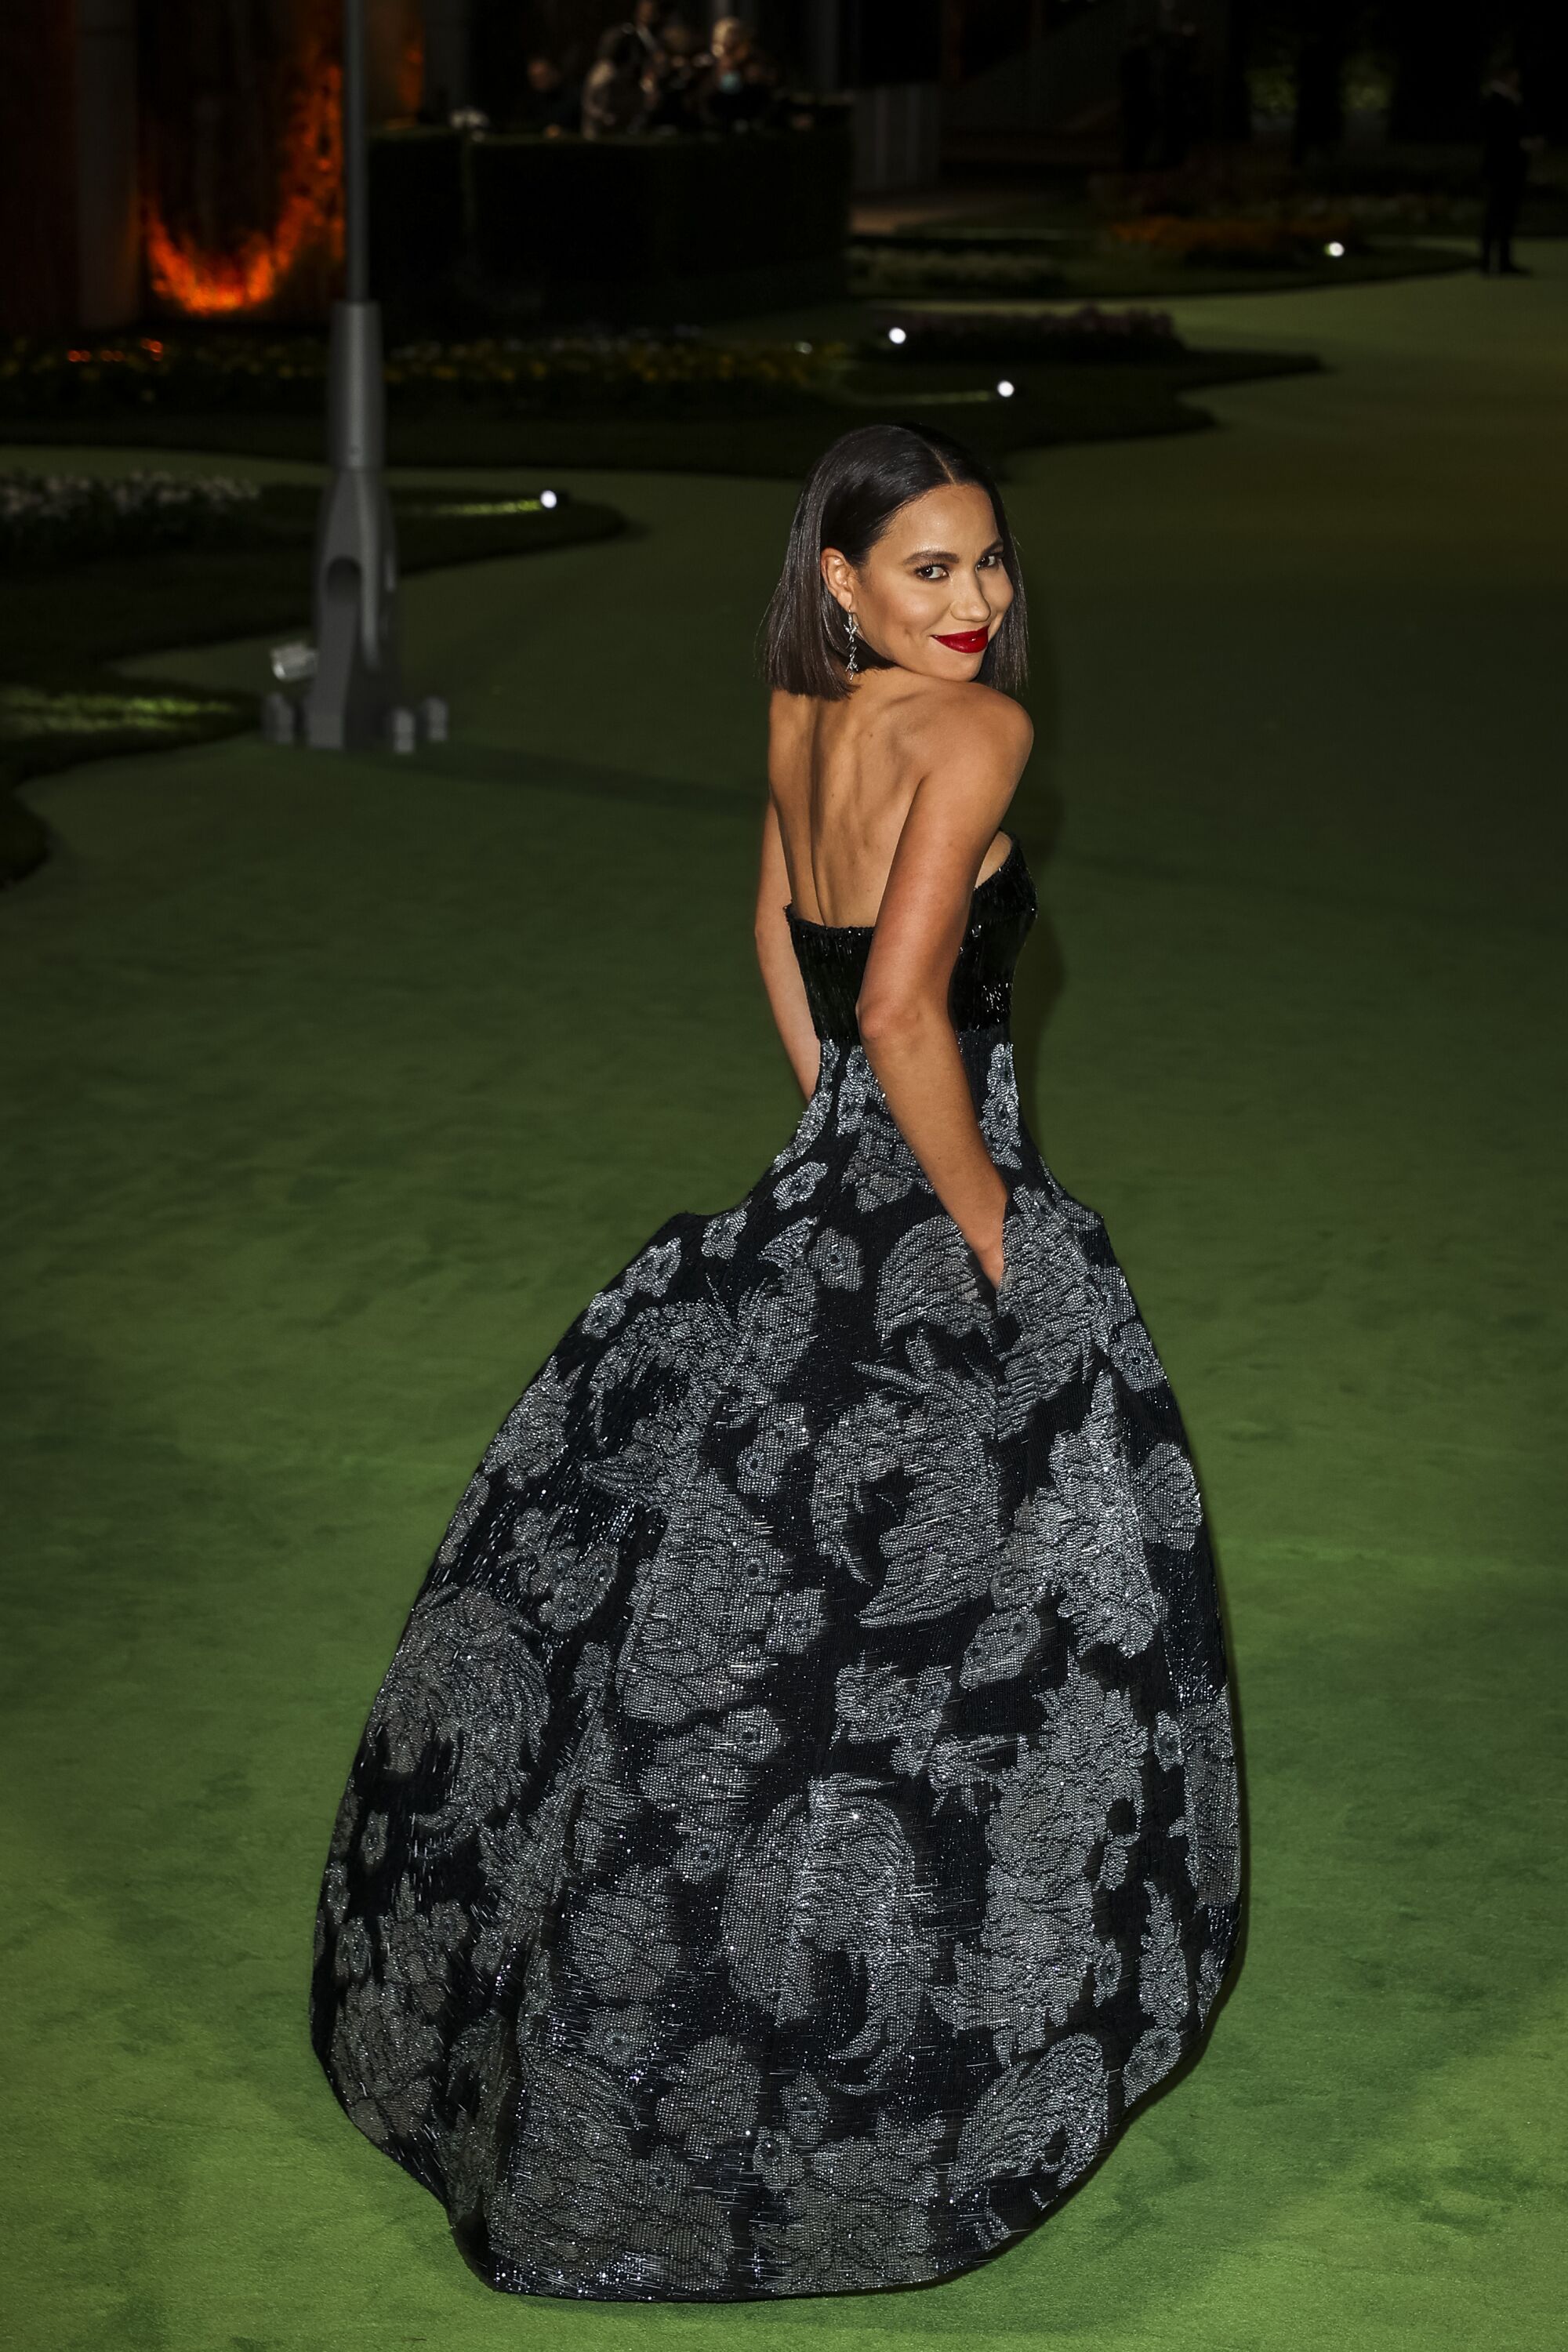 A woman in a patterned, black dress posing on a green carpet